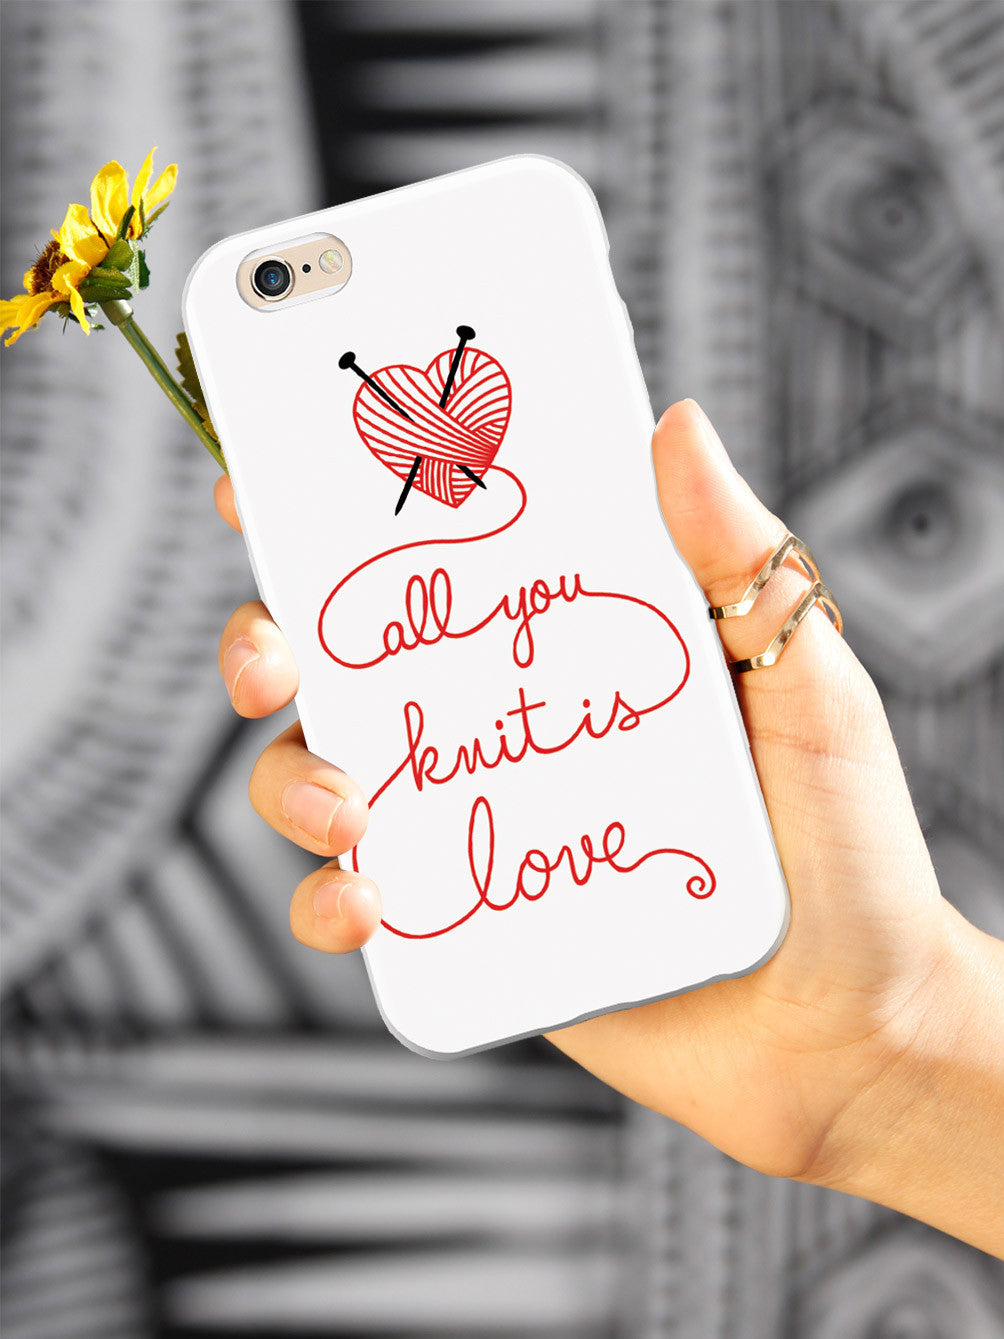 All You Knit is Love Case